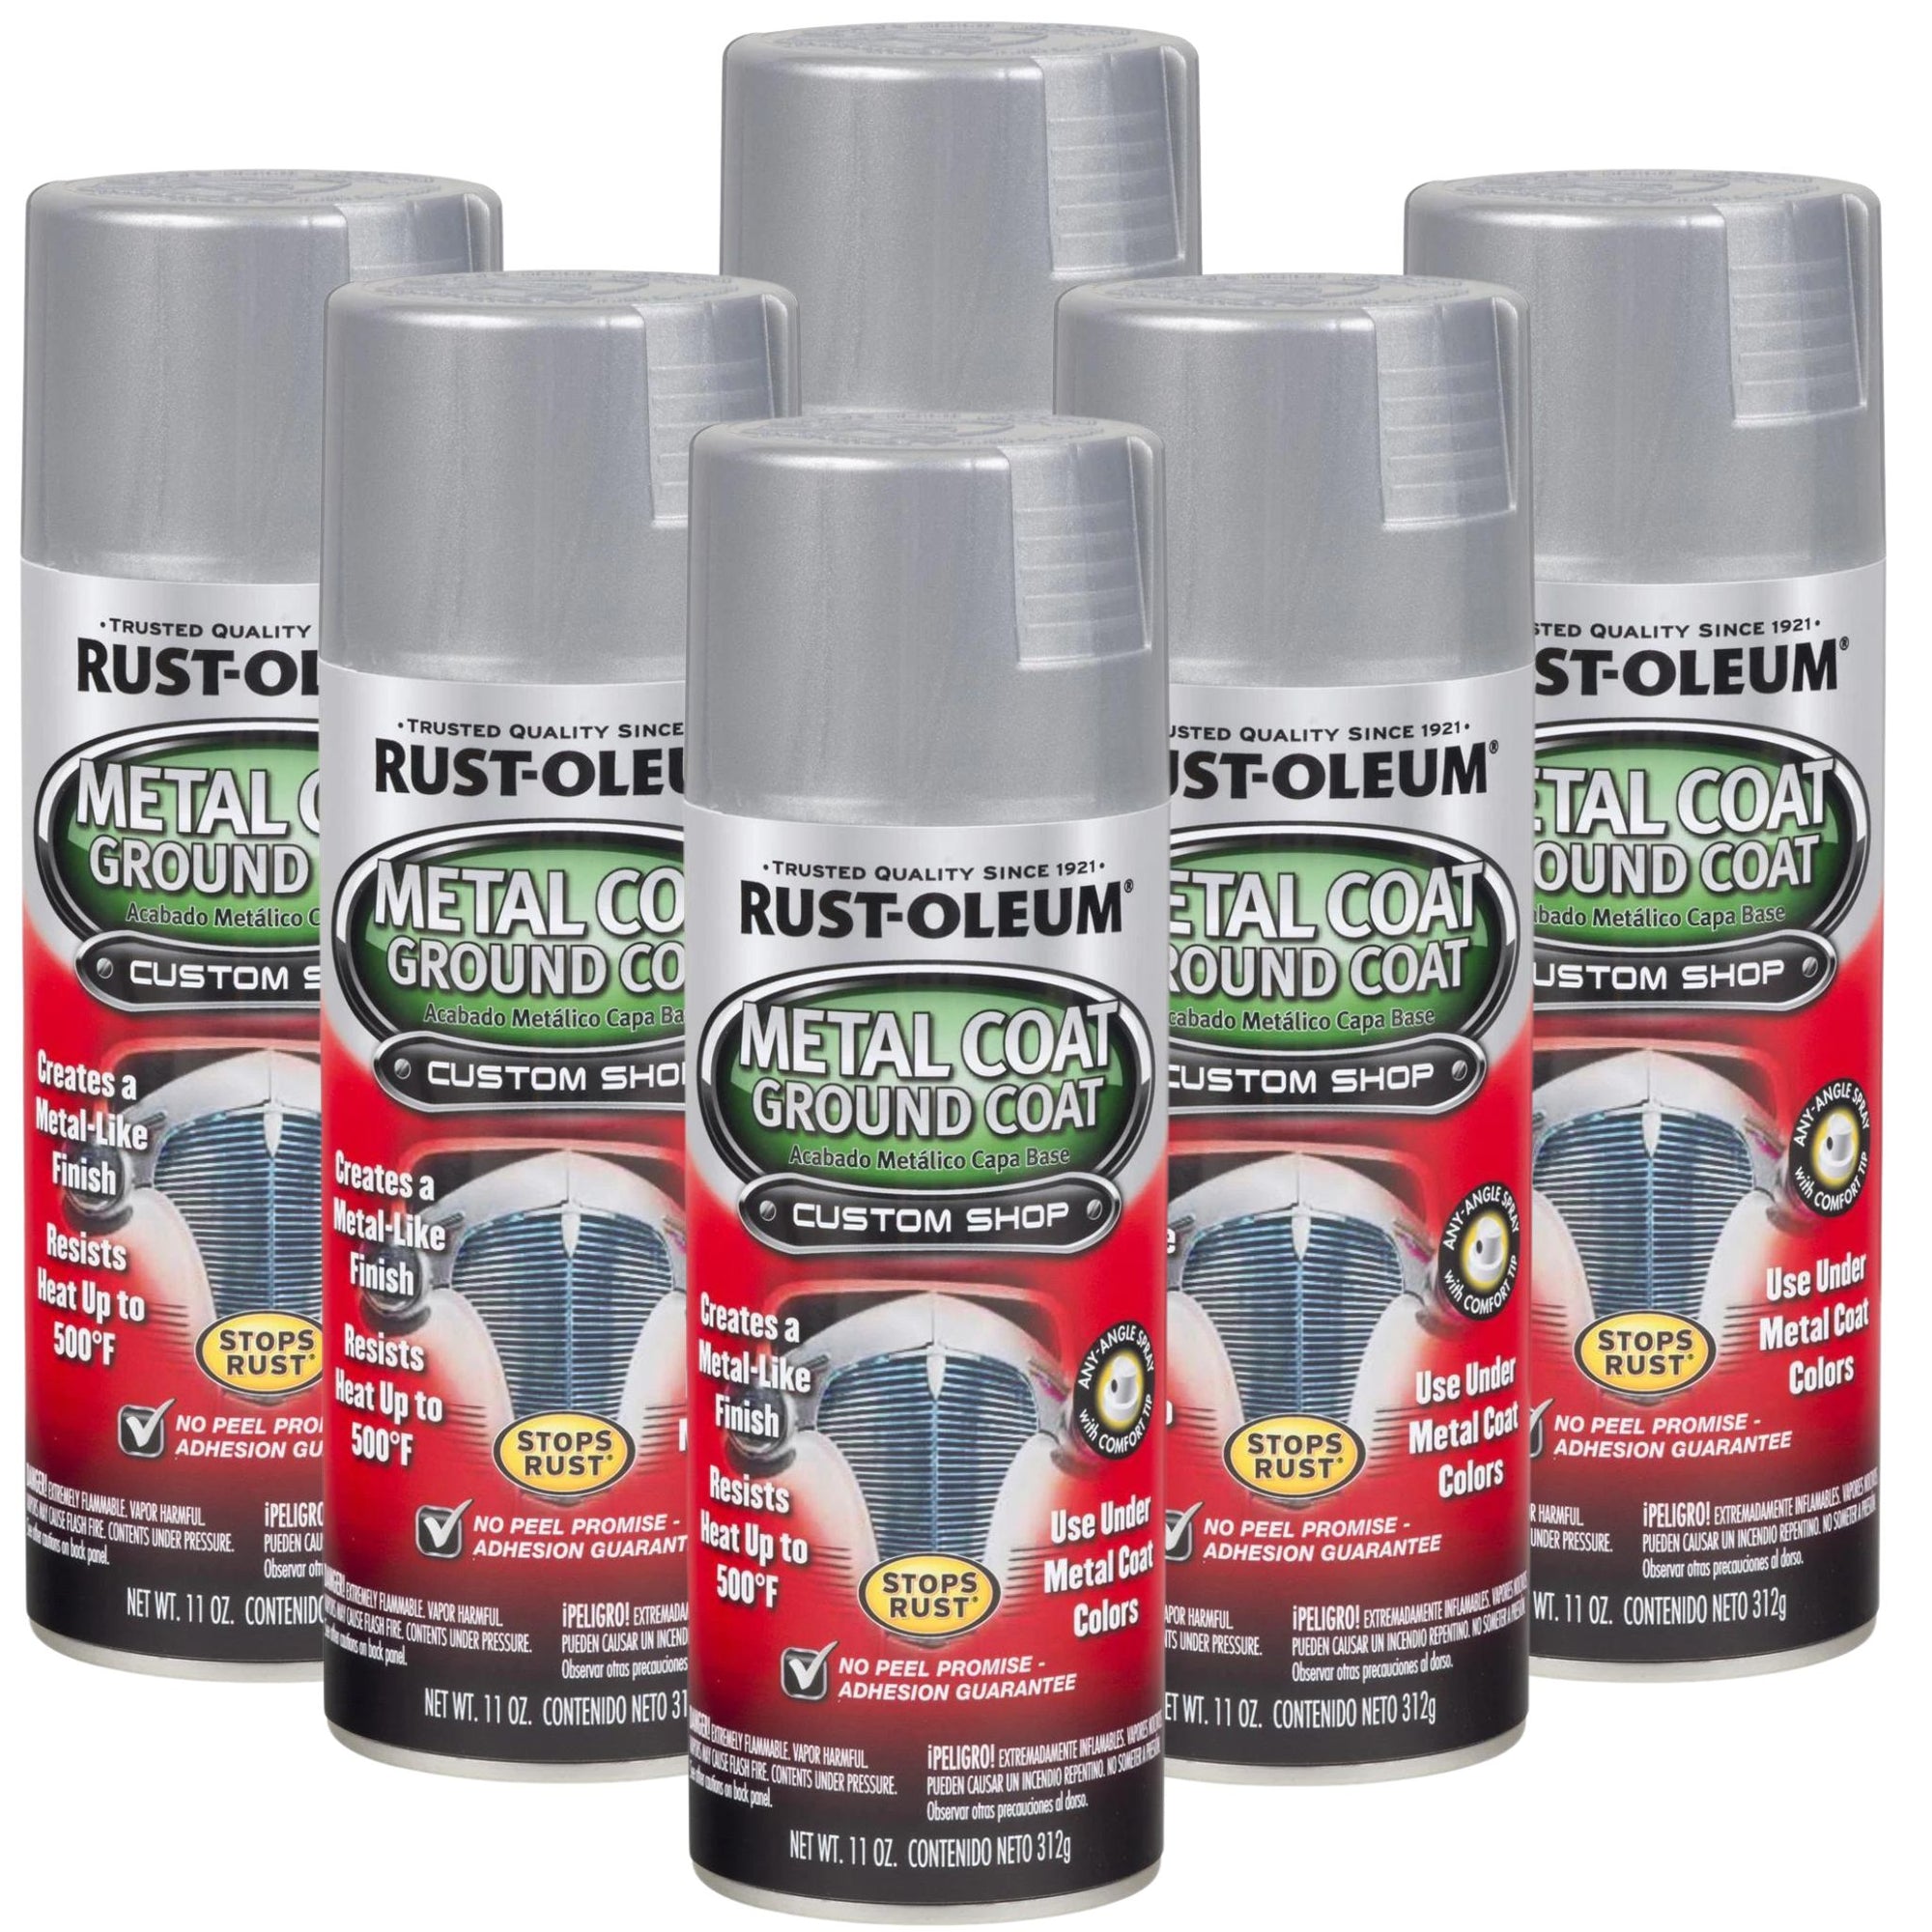 Rust-Oleum Metal Coat Ground Coat High Temp Paint - 6 Cans - South East Clearance Centre